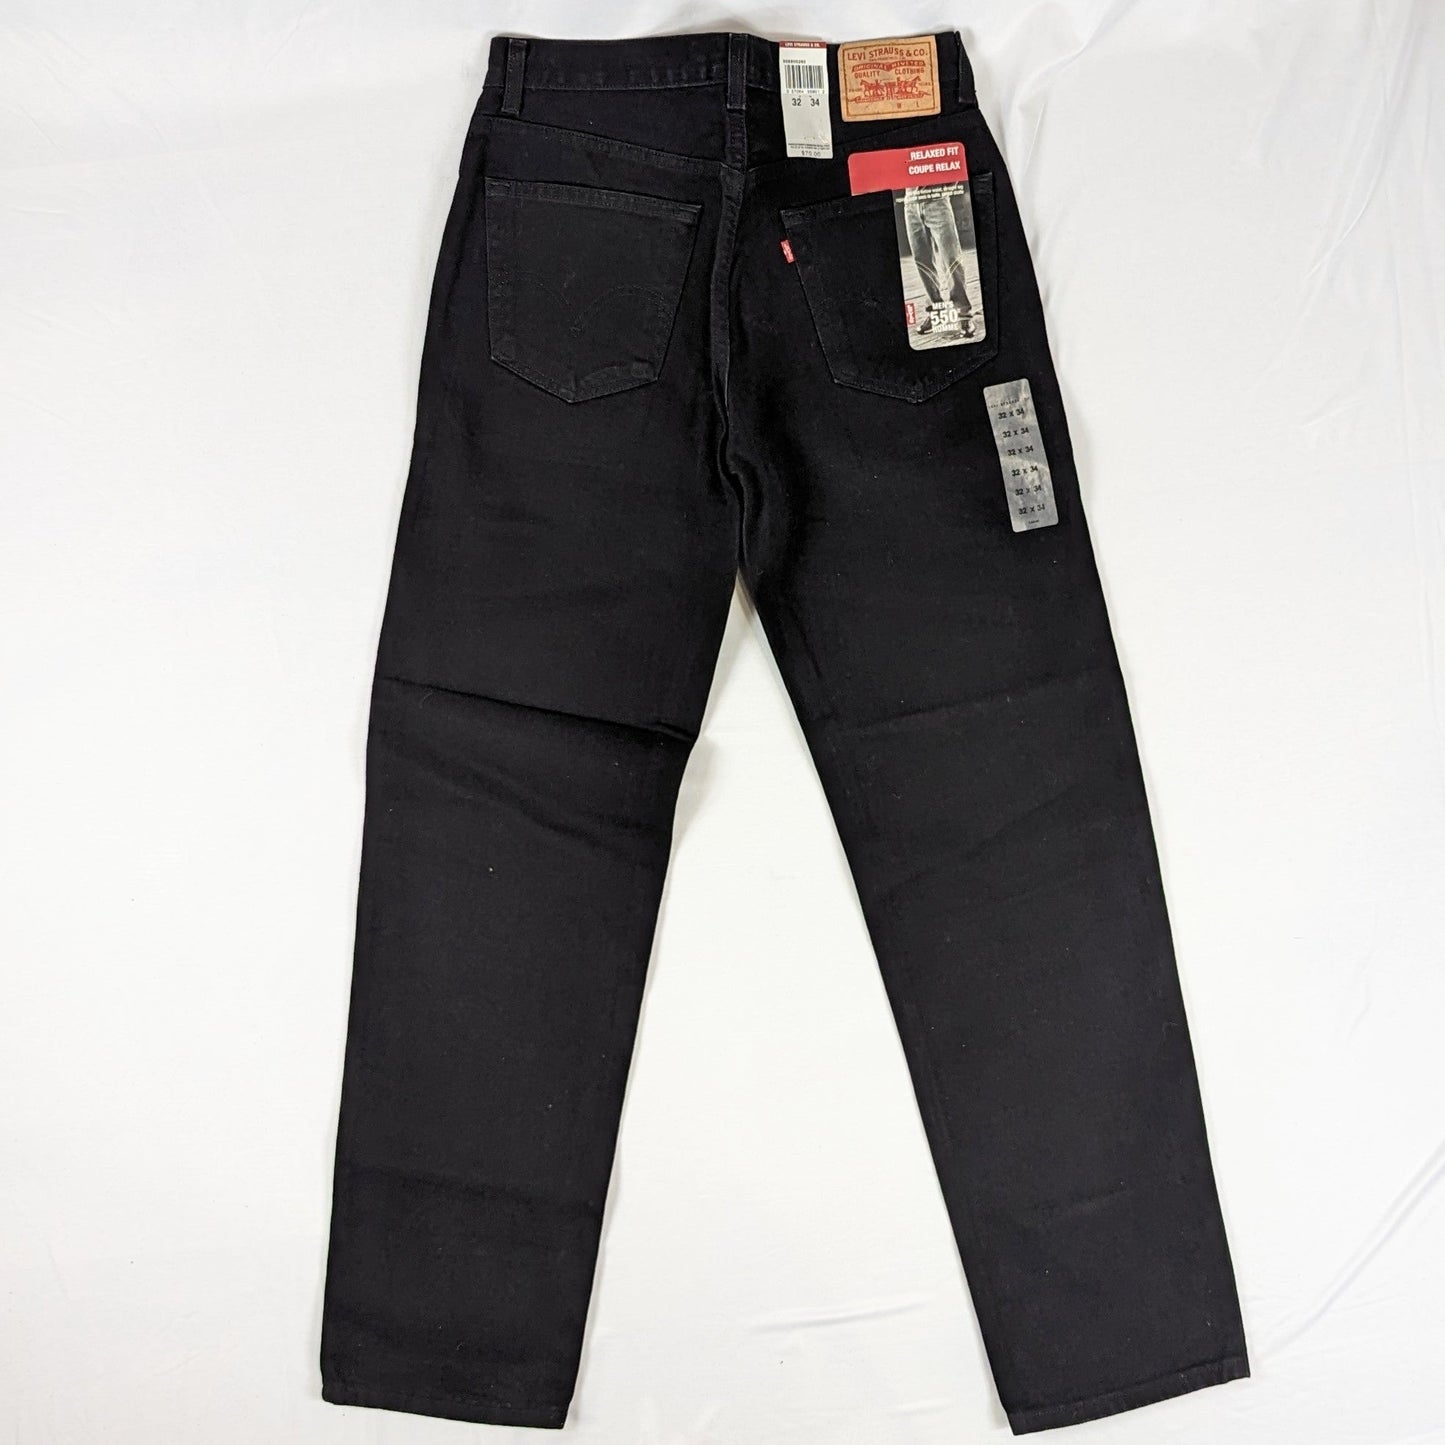 Levis jeans relaxed fit 550 from the 2000s 100% cotton 32x34